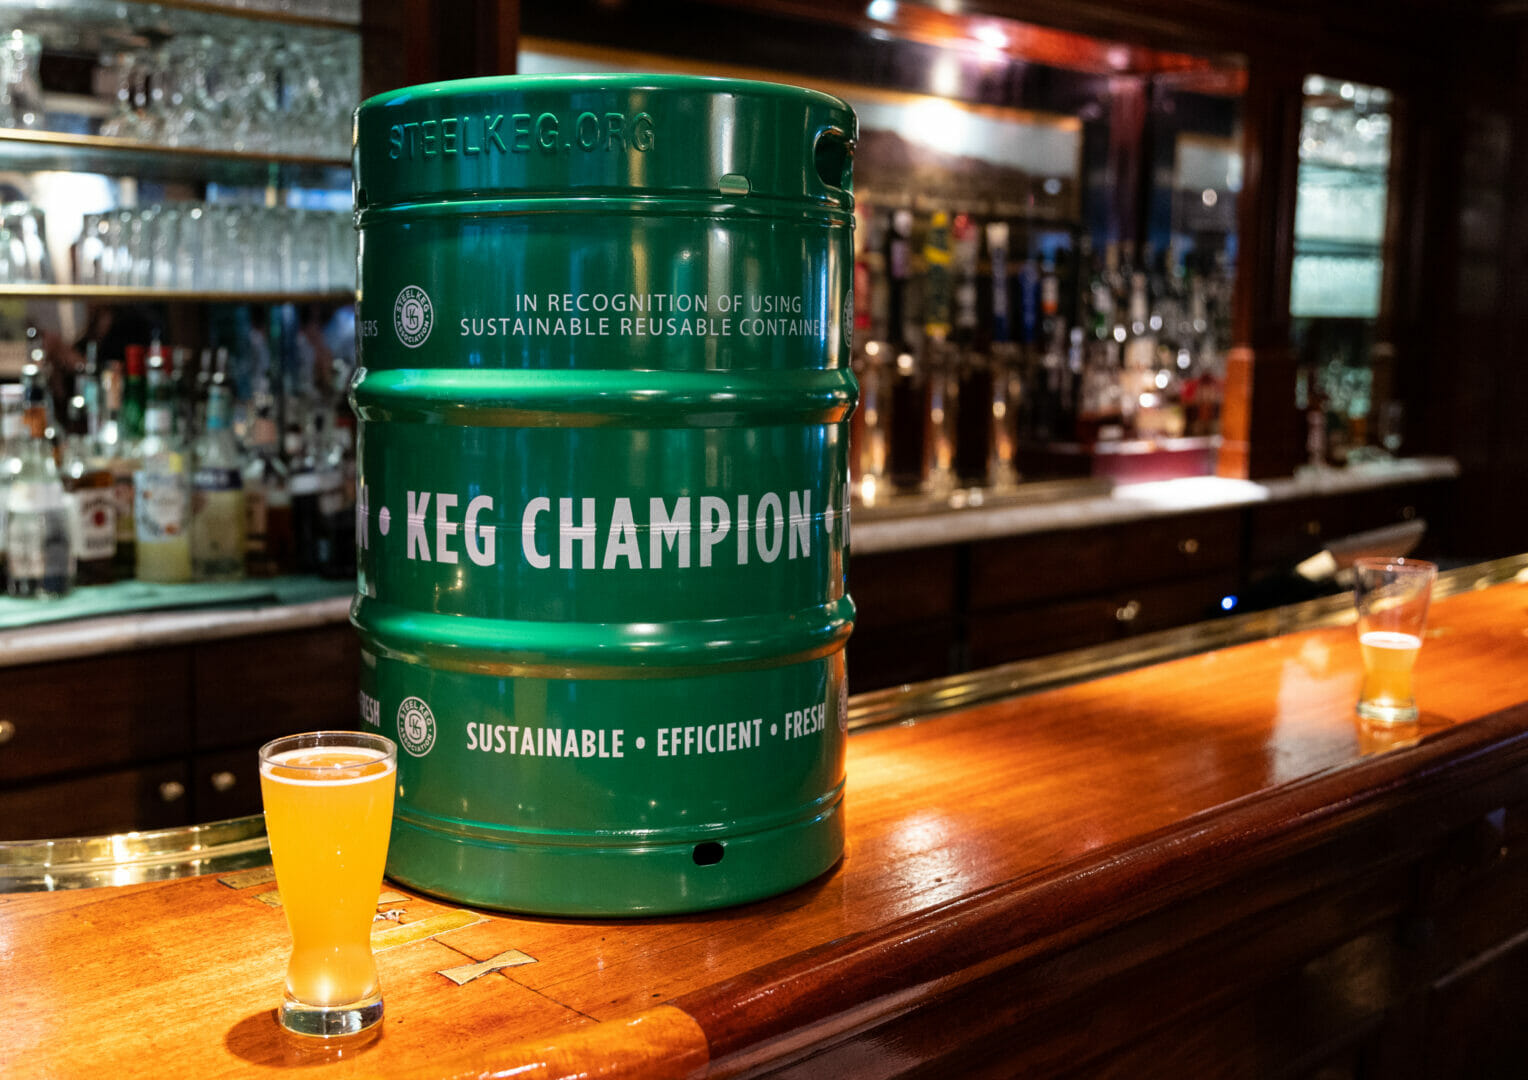 IN CELEBRATION OF WORLD REFILL DAY (16th JUNE), THE STEEL KEG ASSOCIATION LAUNCHES NEW KEG CHAMPION AWARDS